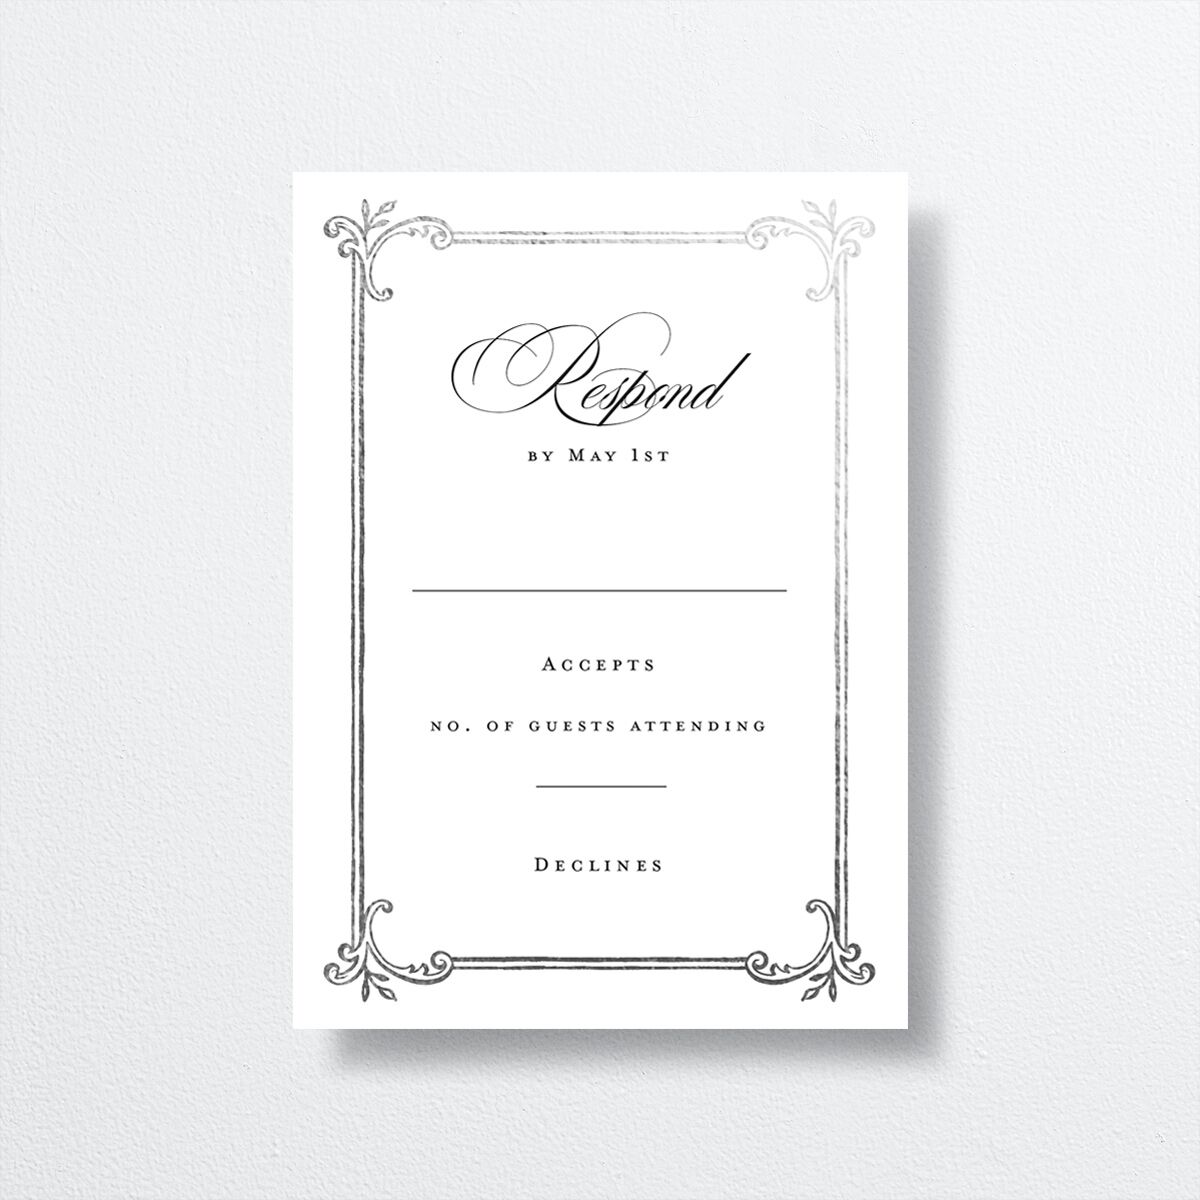 Opulences Wedding Response Cards by Vera Wang front in white